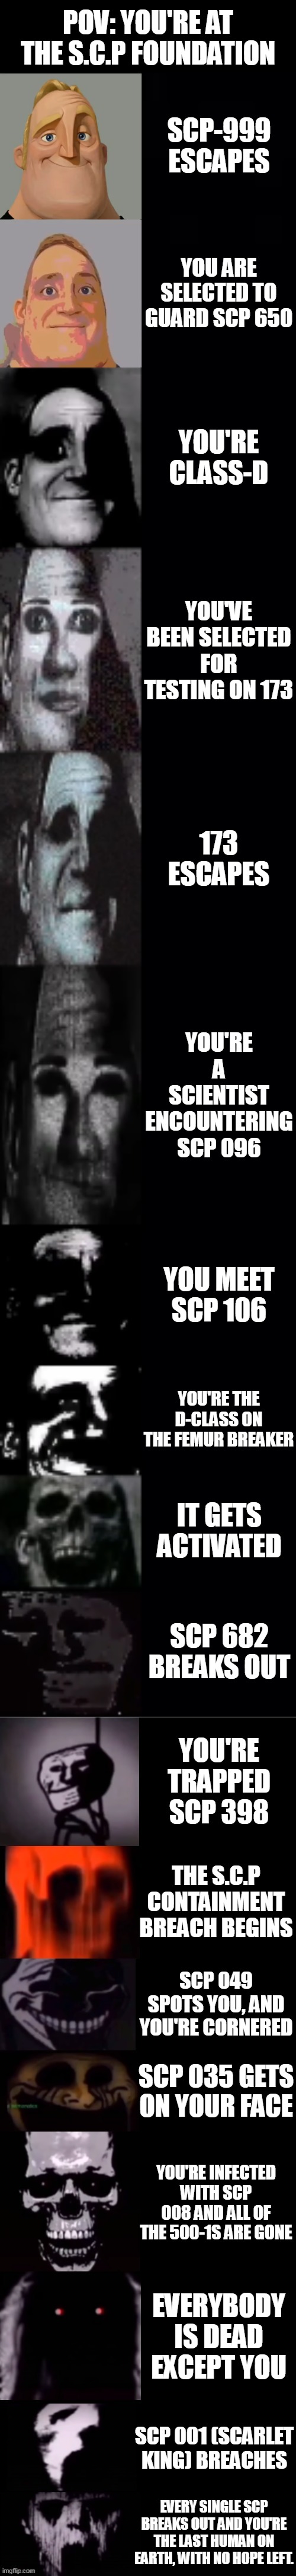 mr incredible becoming uncanny 1st extension | POV: YOU'RE AT THE S.C.P FOUNDATION; SCP-999 ESCAPES; YOU ARE SELECTED TO GUARD SCP 650; YOU'RE CLASS-D; YOU'VE BEEN SELECTED FOR TESTING ON 173; 173 ESCAPES; YOU'RE A SCIENTIST ENCOUNTERING SCP 096; YOU MEET SCP 106; YOU'RE THE D-CLASS ON THE FEMUR BREAKER; IT GETS ACTIVATED; SCP 682 BREAKS OUT; YOU'RE TRAPPED SCP 398; THE S.C.P CONTAINMENT BREACH BEGINS; SCP 049 SPOTS YOU, AND YOU'RE CORNERED; SCP 035 GETS ON YOUR FACE; YOU'RE INFECTED WITH SCP 008 AND ALL OF THE 500-1S ARE GONE; EVERYBODY IS DEAD EXCEPT YOU; SCP 001 (SCARLET KING) BREACHES; EVERY SINGLE SCP BREAKS OUT AND YOU'RE THE LAST HUMAN ON EARTH, WITH NO HOPE LEFT. | image tagged in mr incredible becoming uncanny 1st extension | made w/ Imgflip meme maker